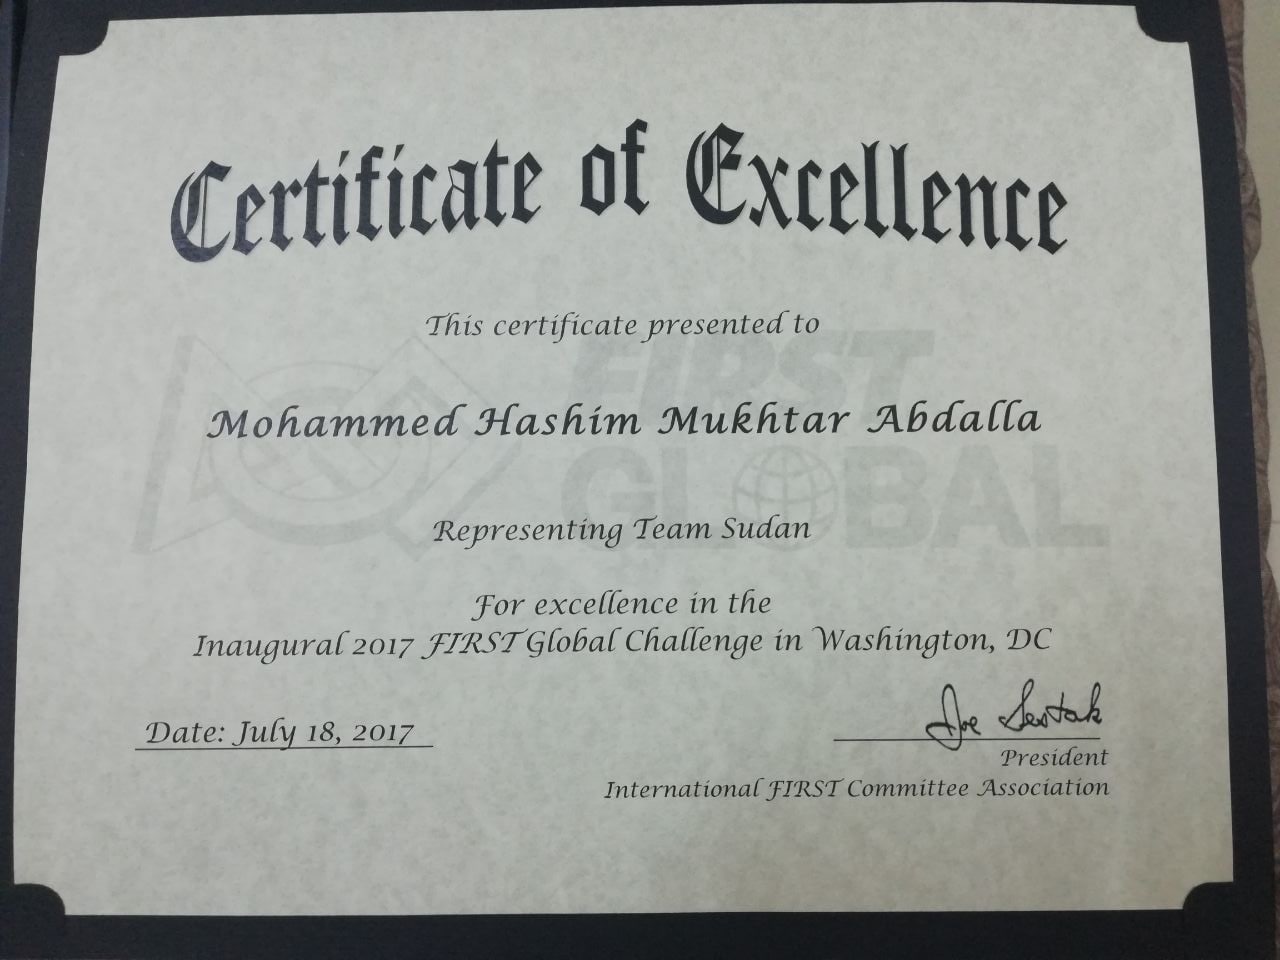 Certificate of Excellence by First Global, Washington, USA